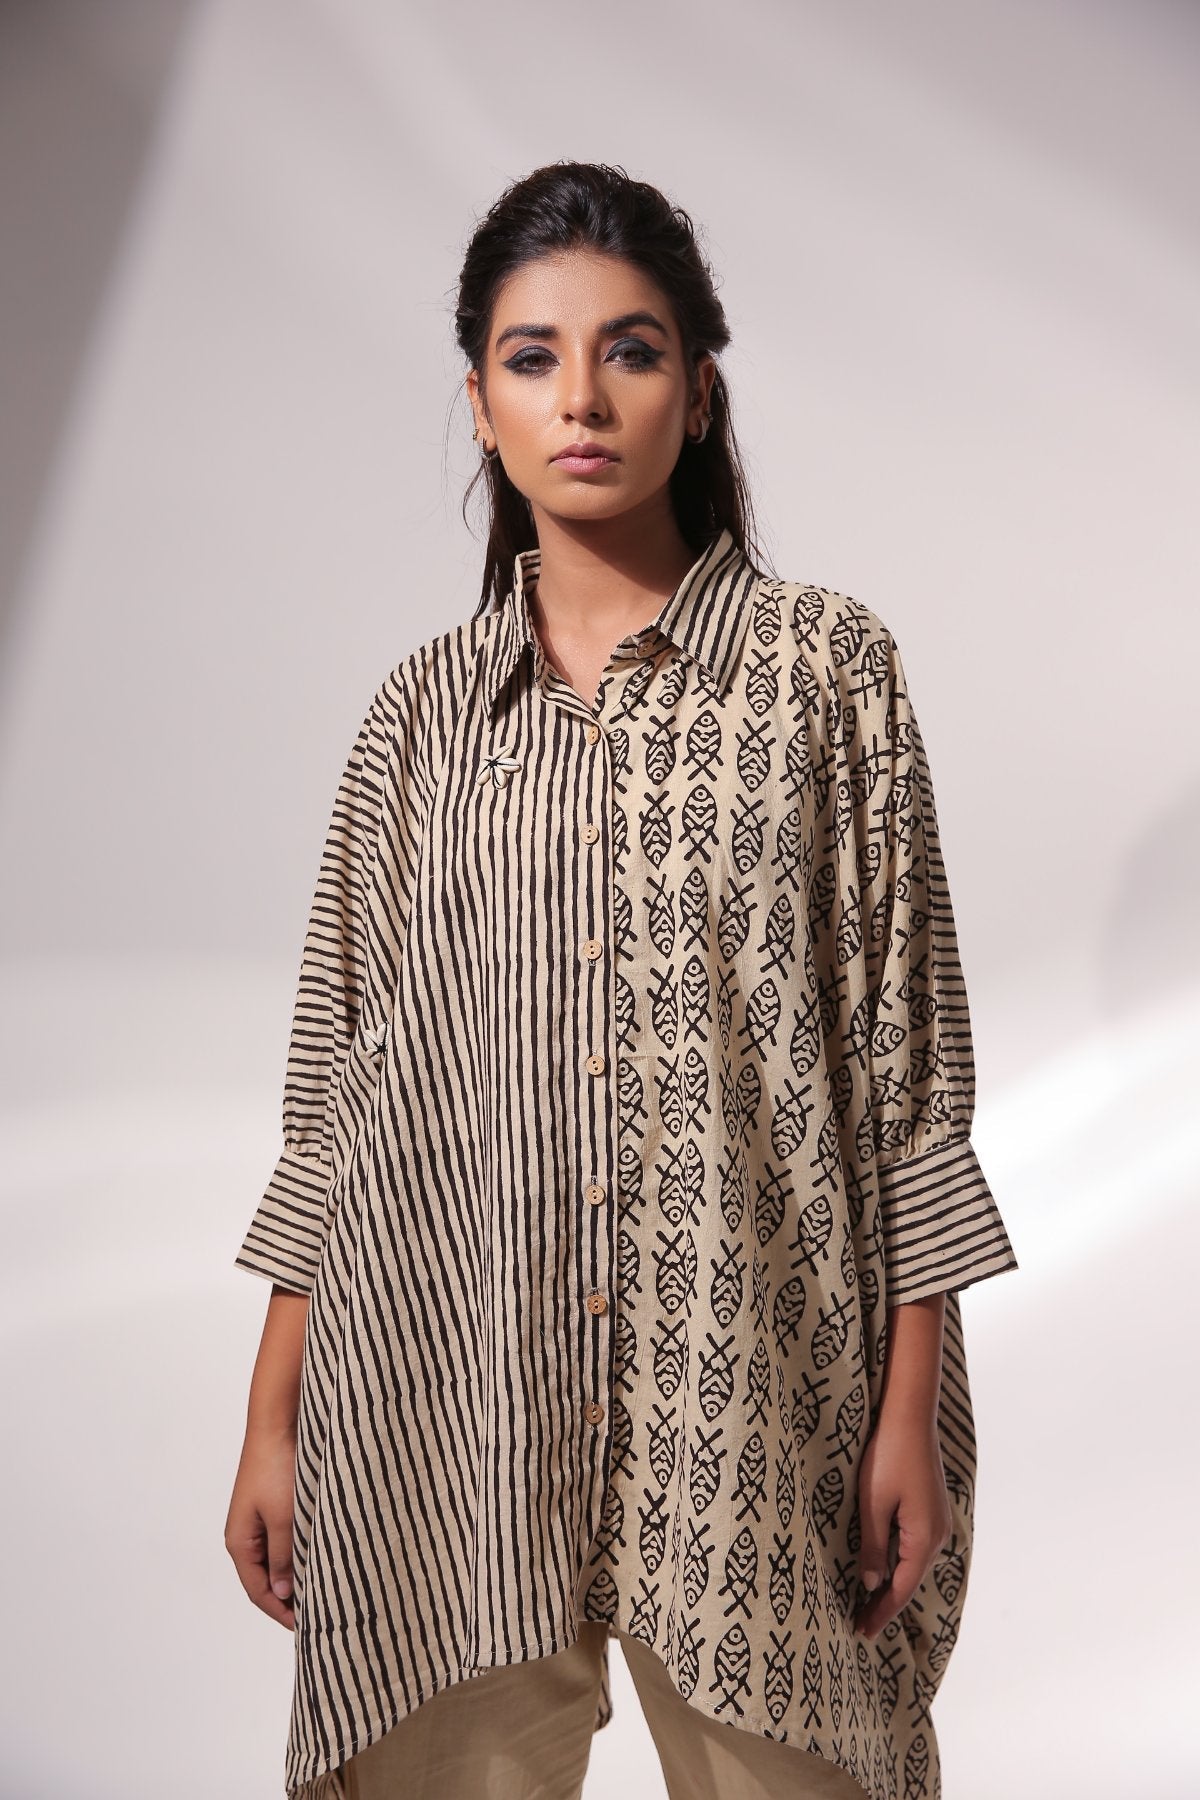 Beige Kaftan Shirt With Wide Leg Pant at Kamakhyaa by Keva. This item is Beige, Black, Block Prints, Co-ord Sets, Cotton, For Mother, For Mother W, Natural, Office Wear Co-ords, Relaxed Fit, Resort Wear, Travel, Travel Co-ords, Womenswear, Zima